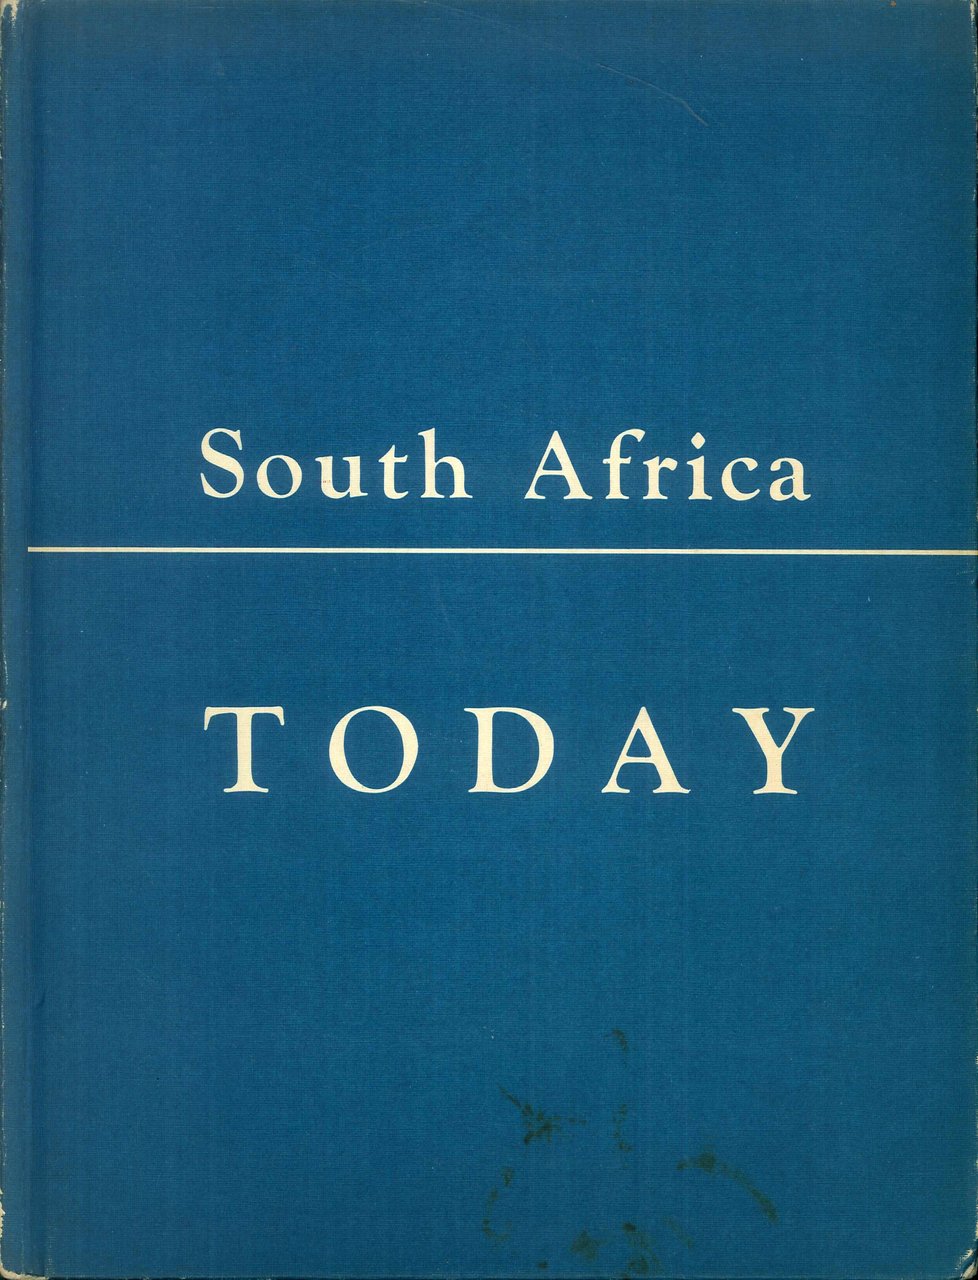 South Africa Today, 1967